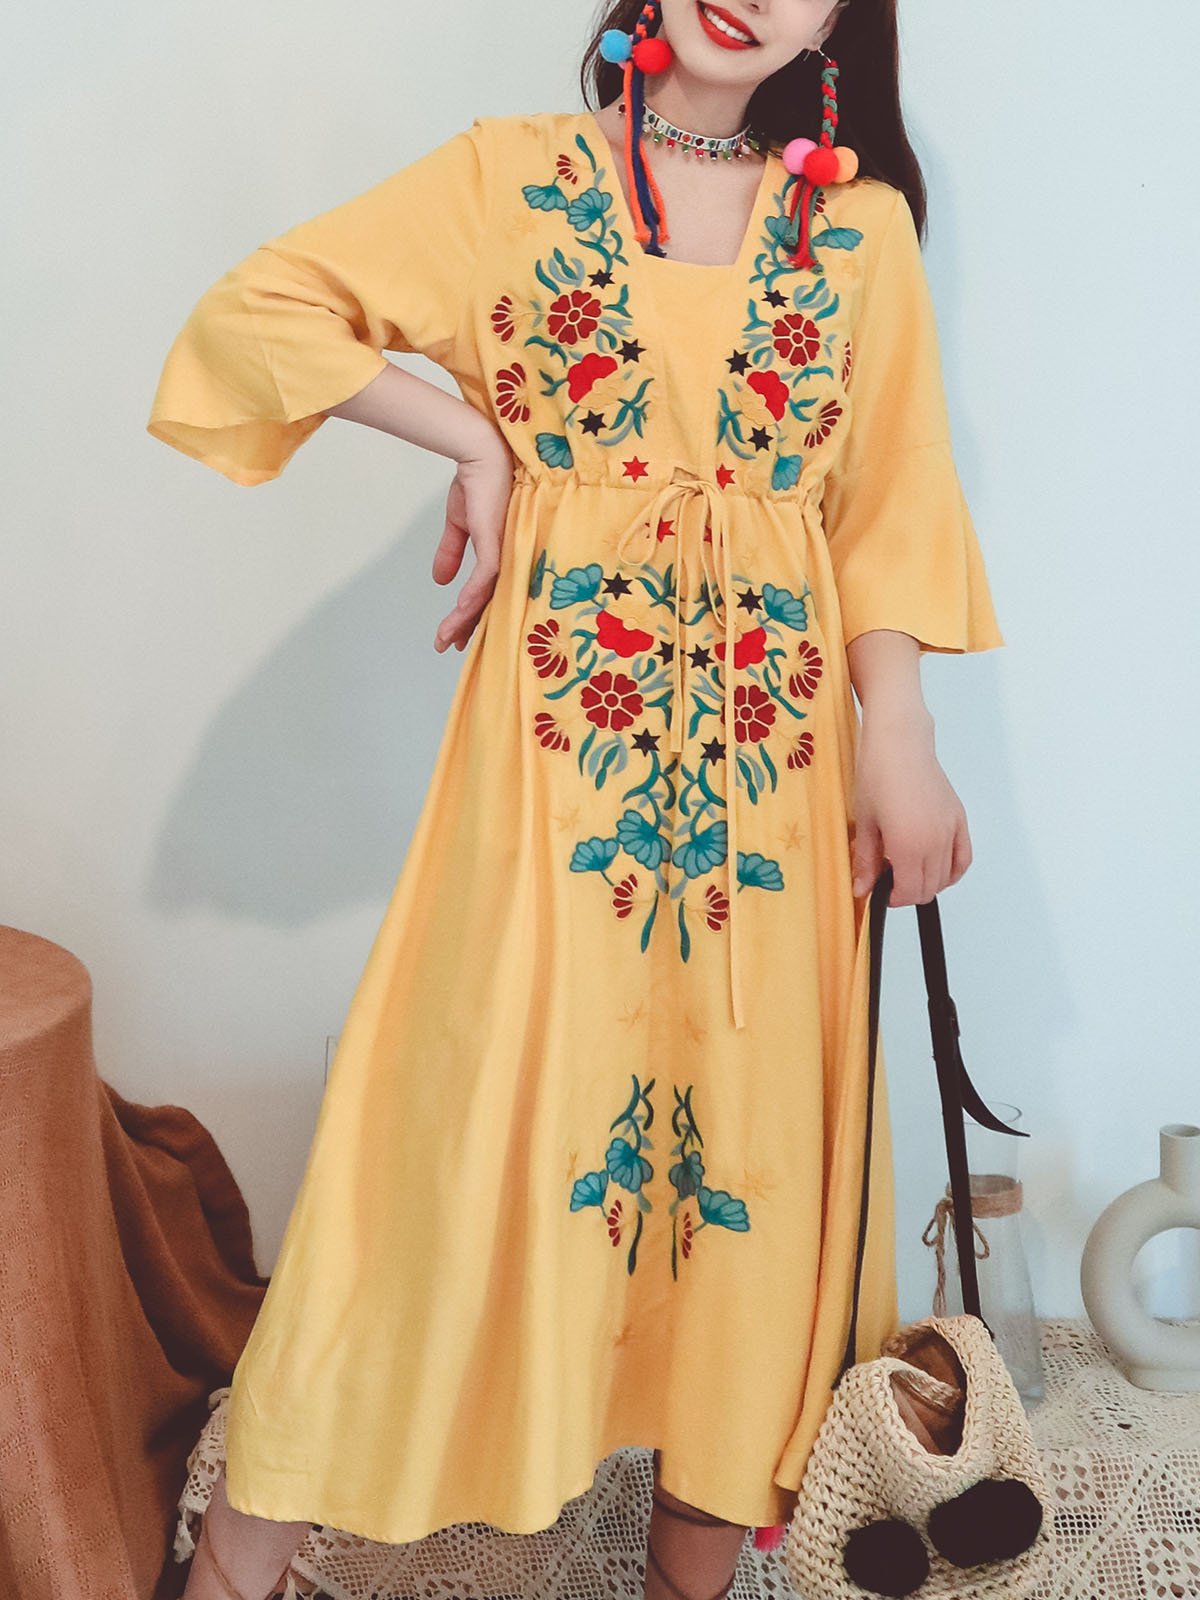 Women's Cotton Embroidered Floral Square Neck Flared Half Sleeve Maxi Boho Dress